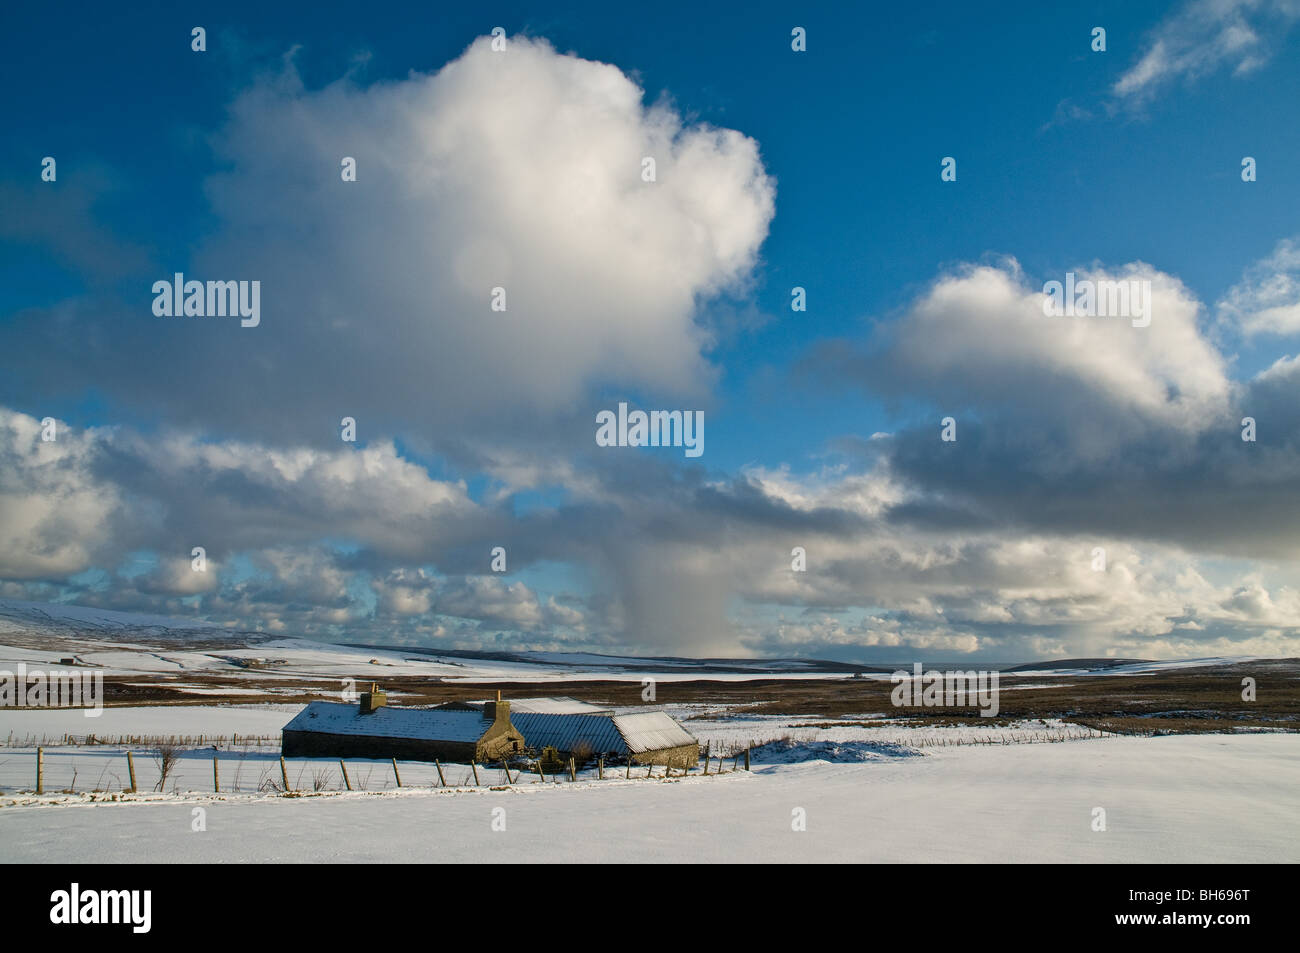 dh Naversdale ORPHIR ORKNEY Snowy covered moorland farmhouse and buildings snow wintertime scotland winter farming house landscape uk Stock Photo